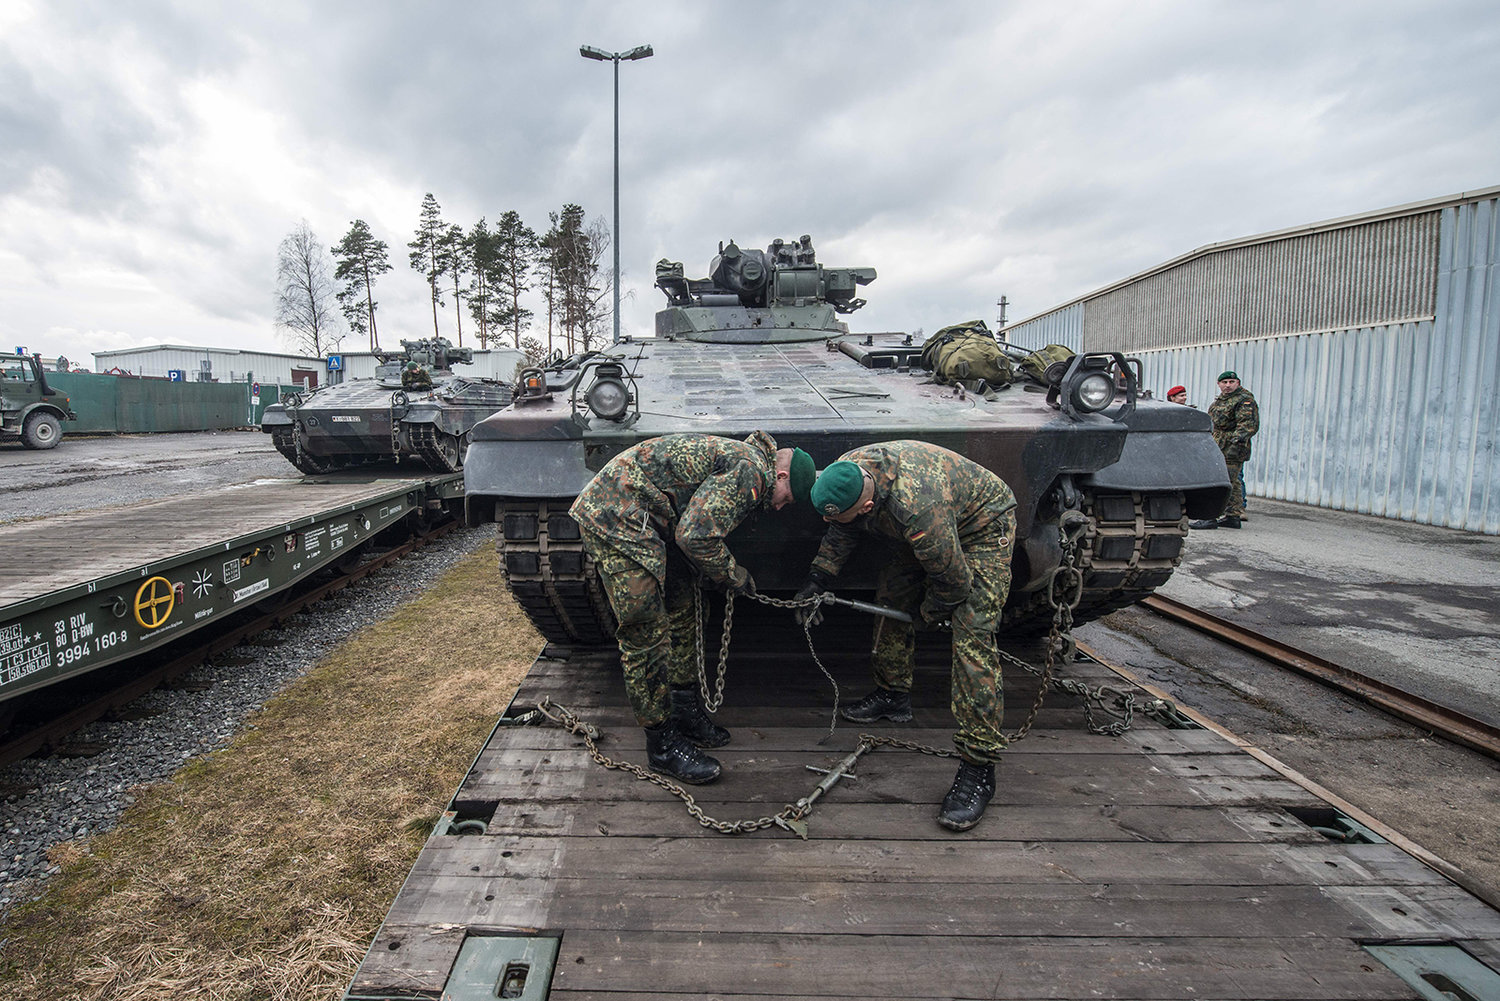 German soldiers load armored vehicles of the type "Marder" on a train at the troop exercise area in Grafenwoehr, southern Germany, on Feb. 21, 2017. (Armin Weigel/DPA/AFP via Getty Images/TNS)